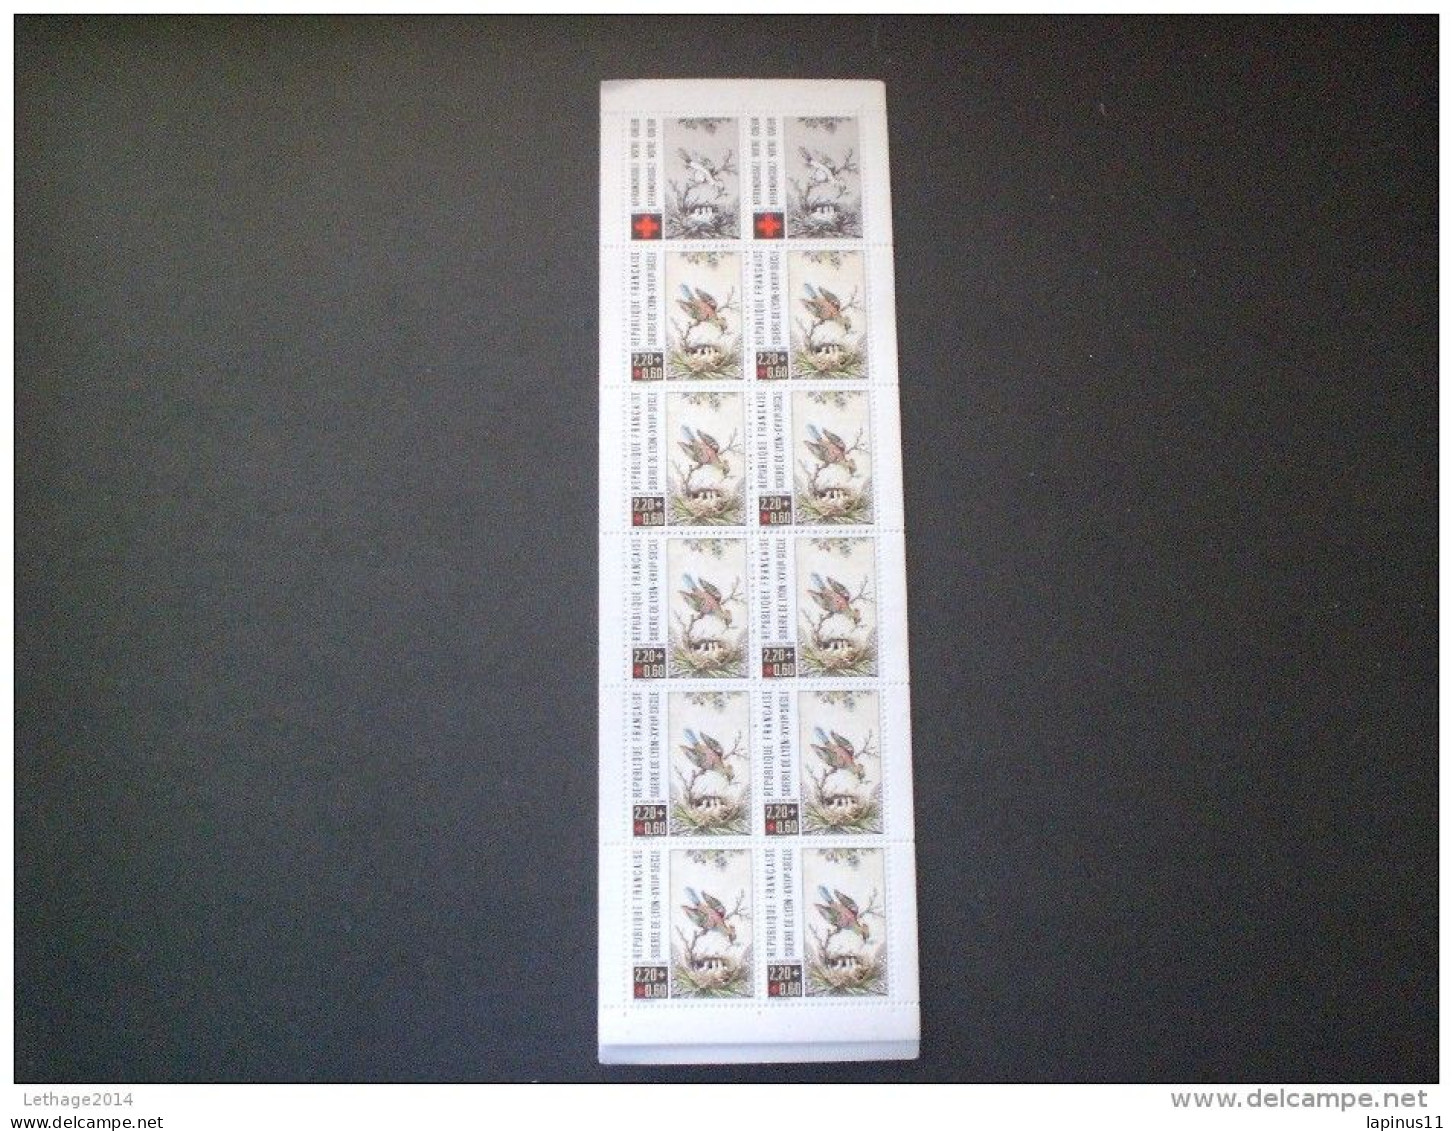 STAMPS FRANCE CARNETS 1985 RED CROSS - People